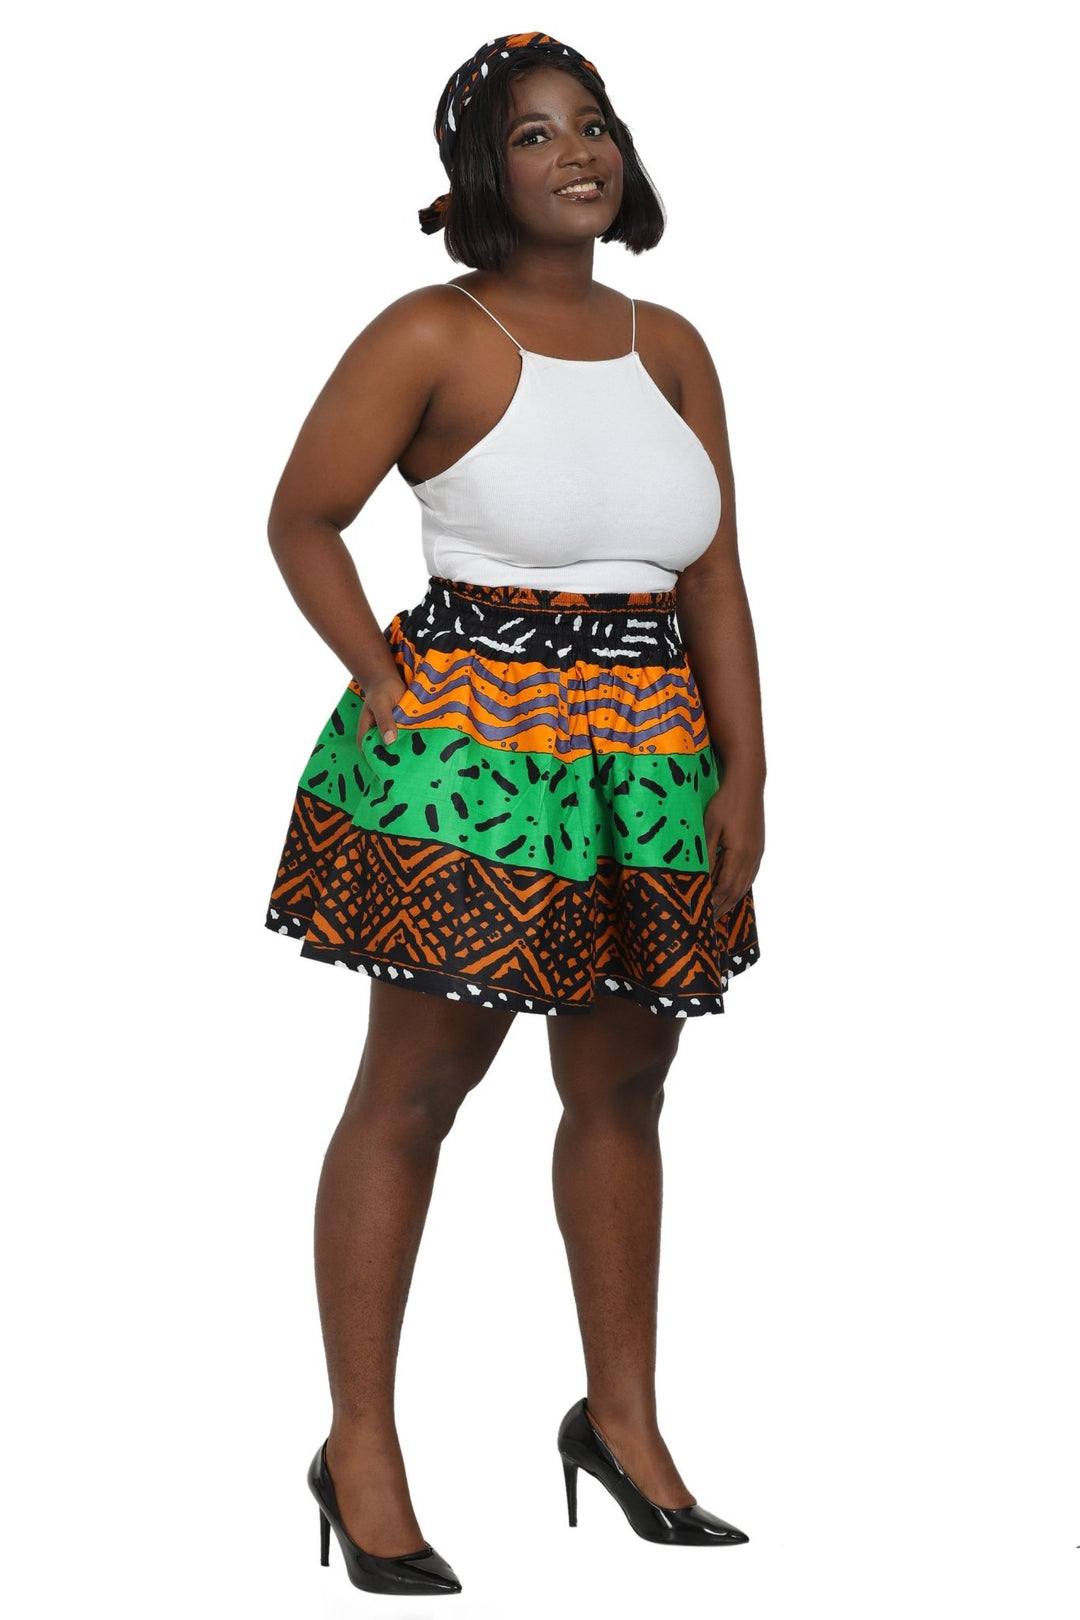 Short Length African Print Skirt One Size Fits Most 16412 - Advance Apparels Inc